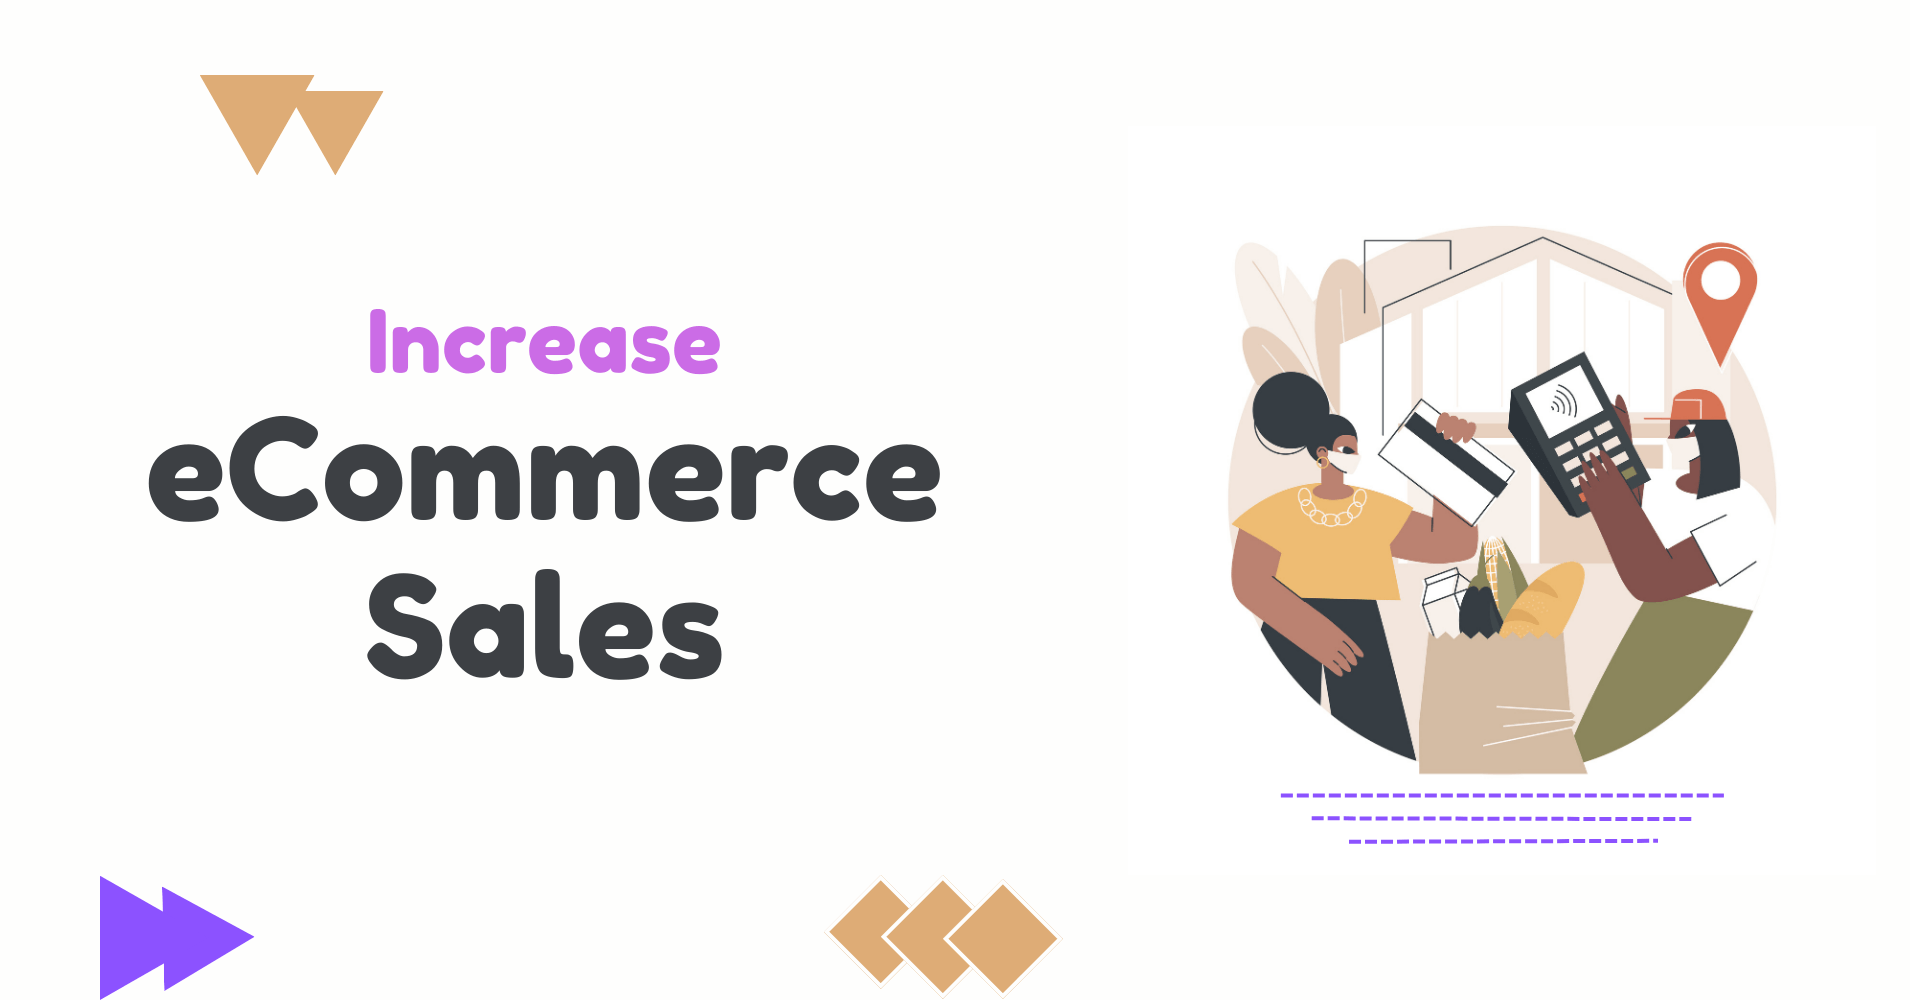 How to increase eCommerce sales